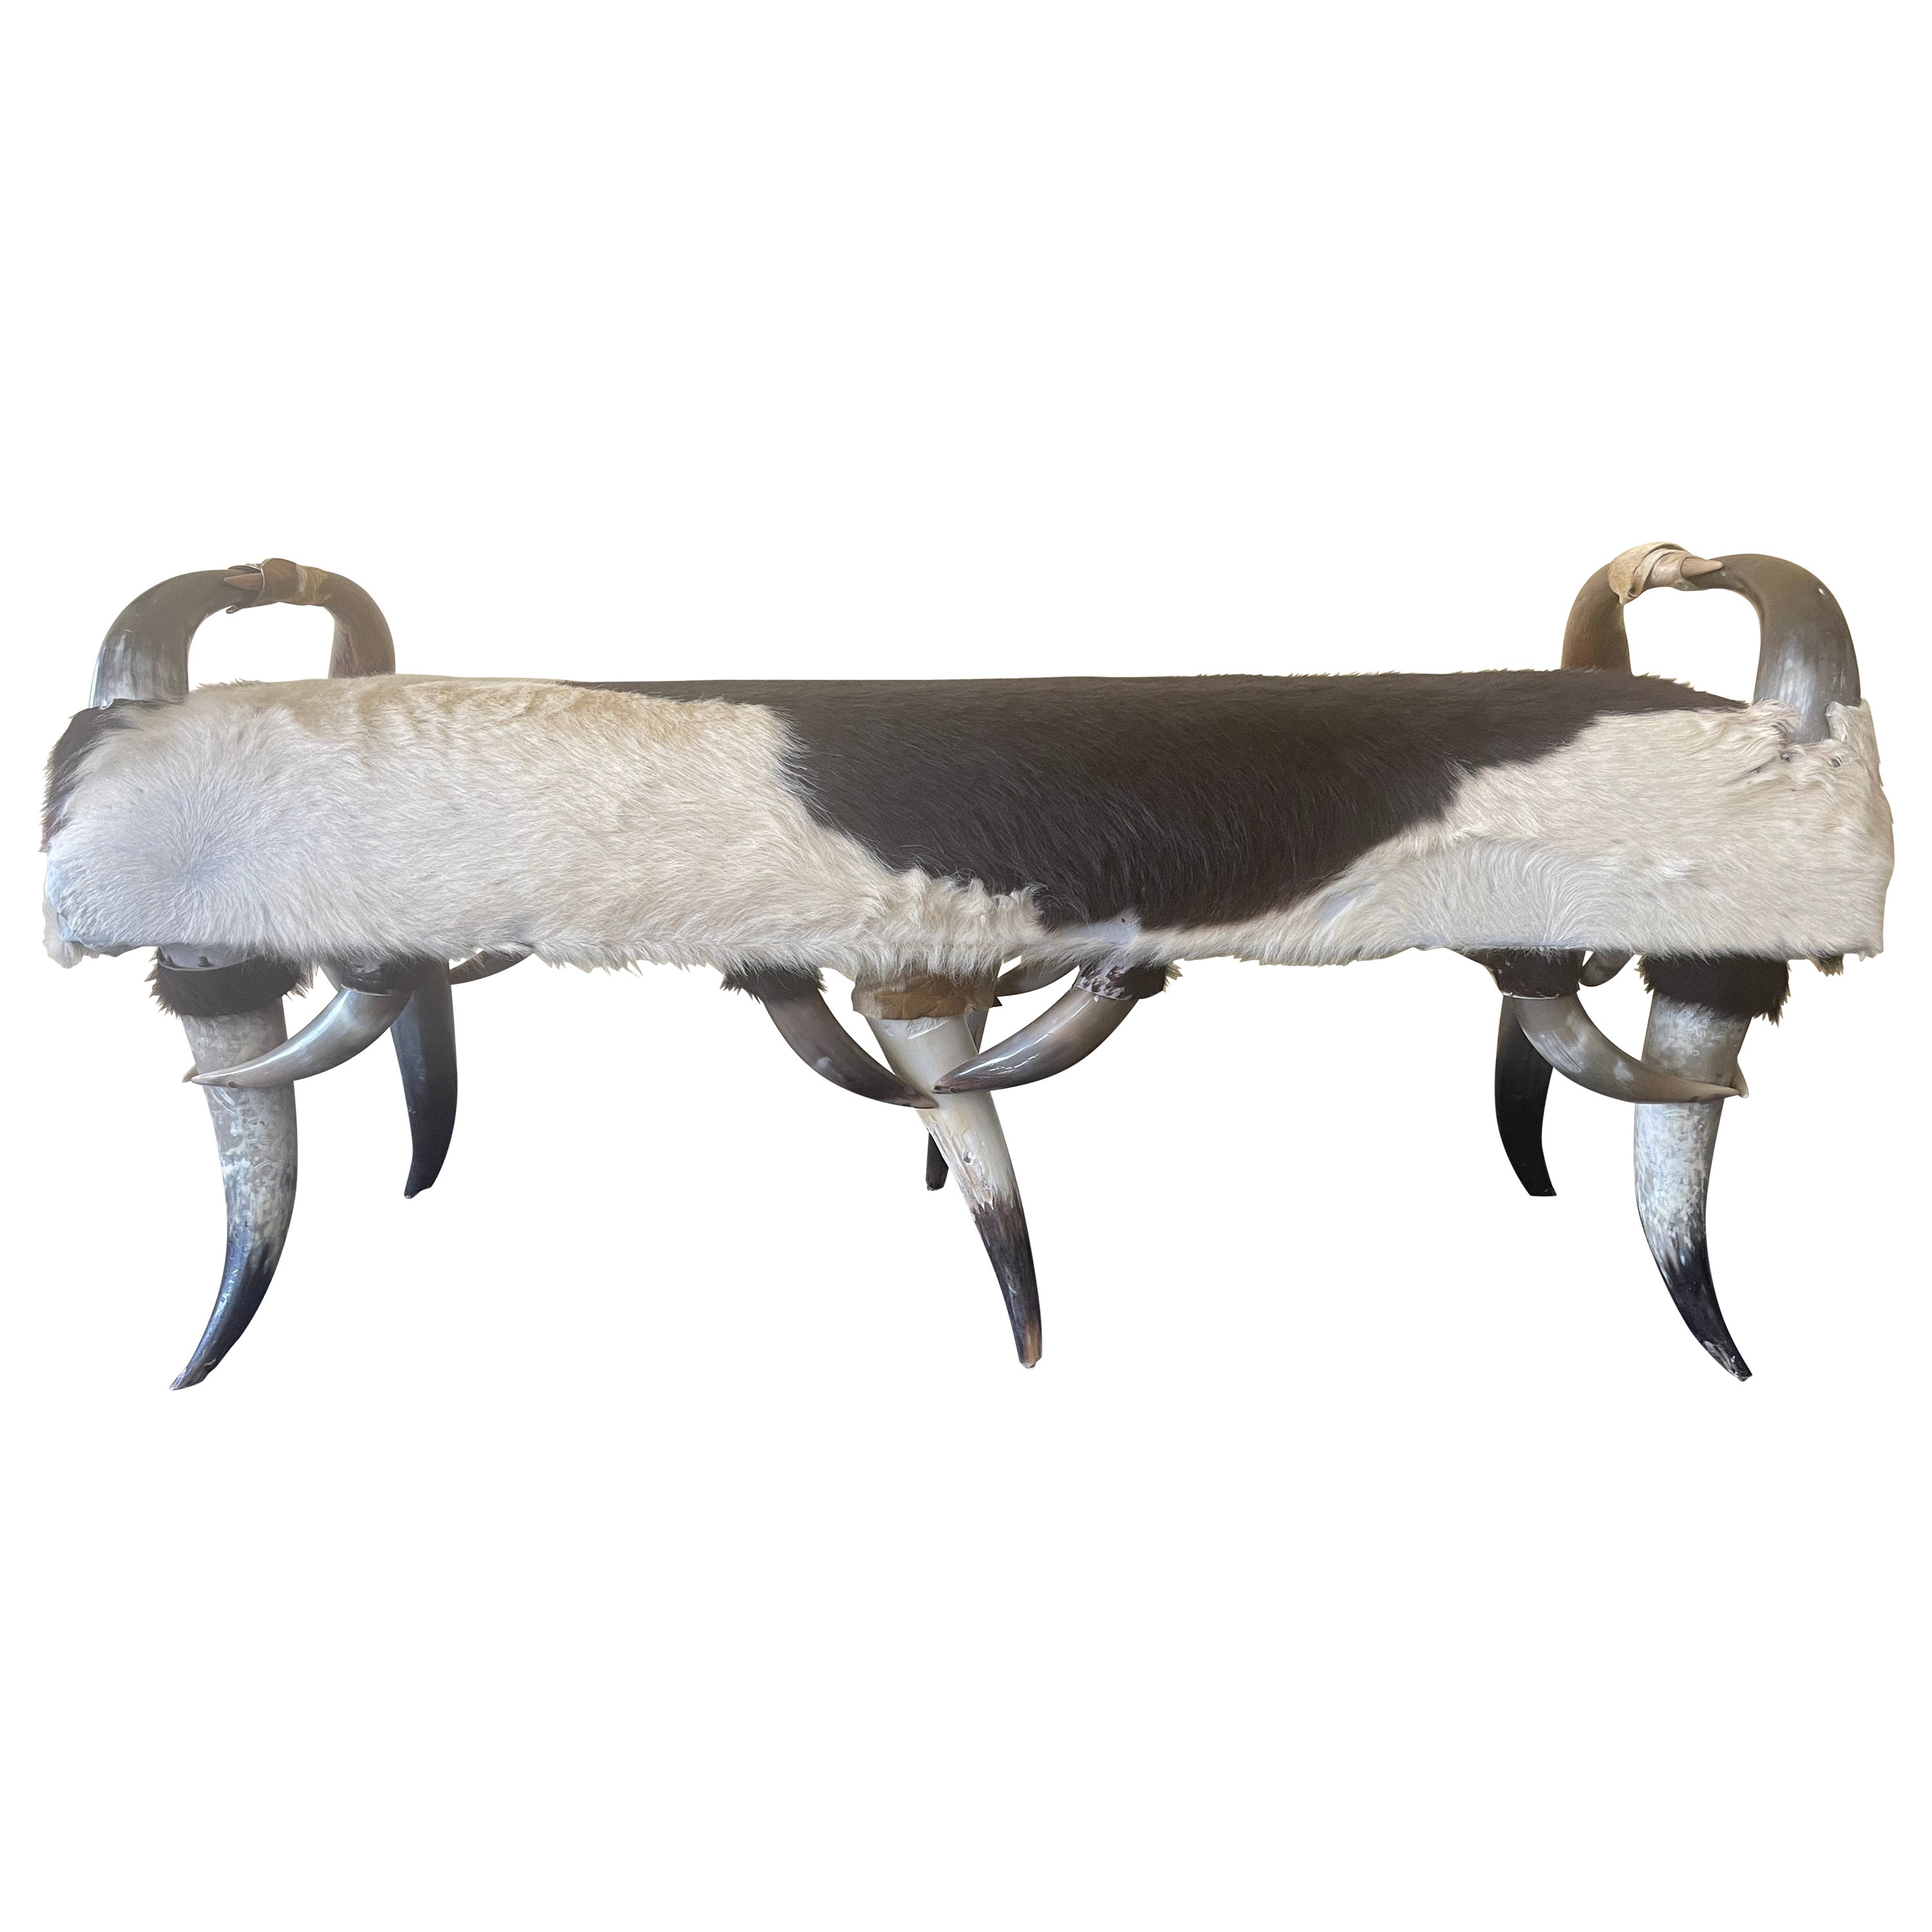 Six Legged Long Horn and Cowhide Bench